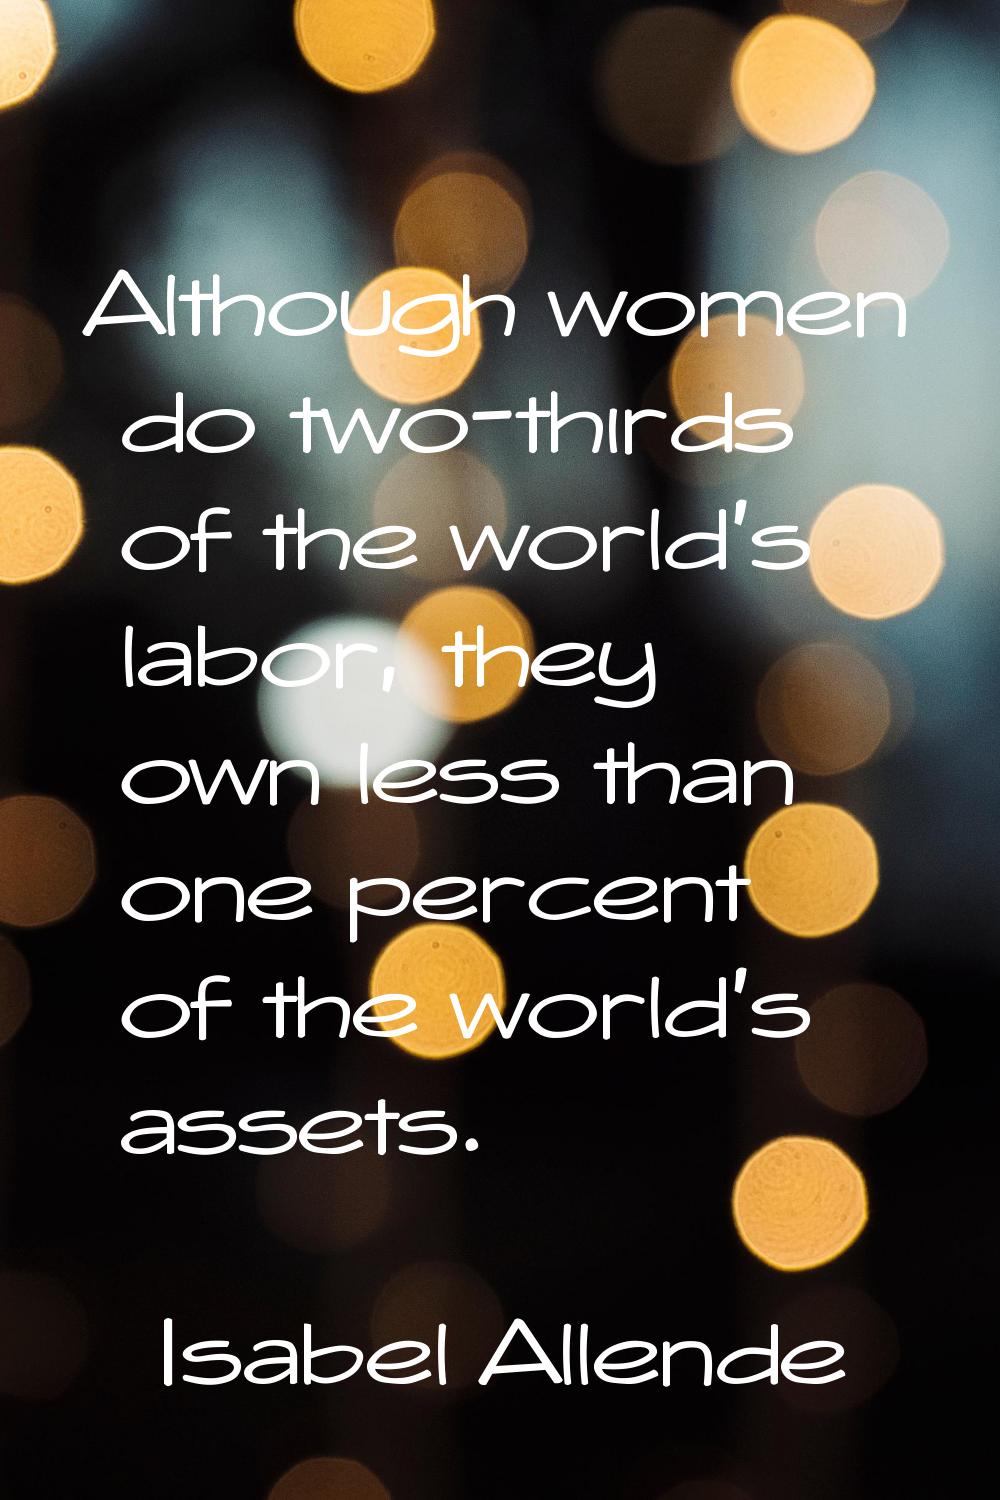 Although women do two-thirds of the world's labor, they own less than one percent of the world's as